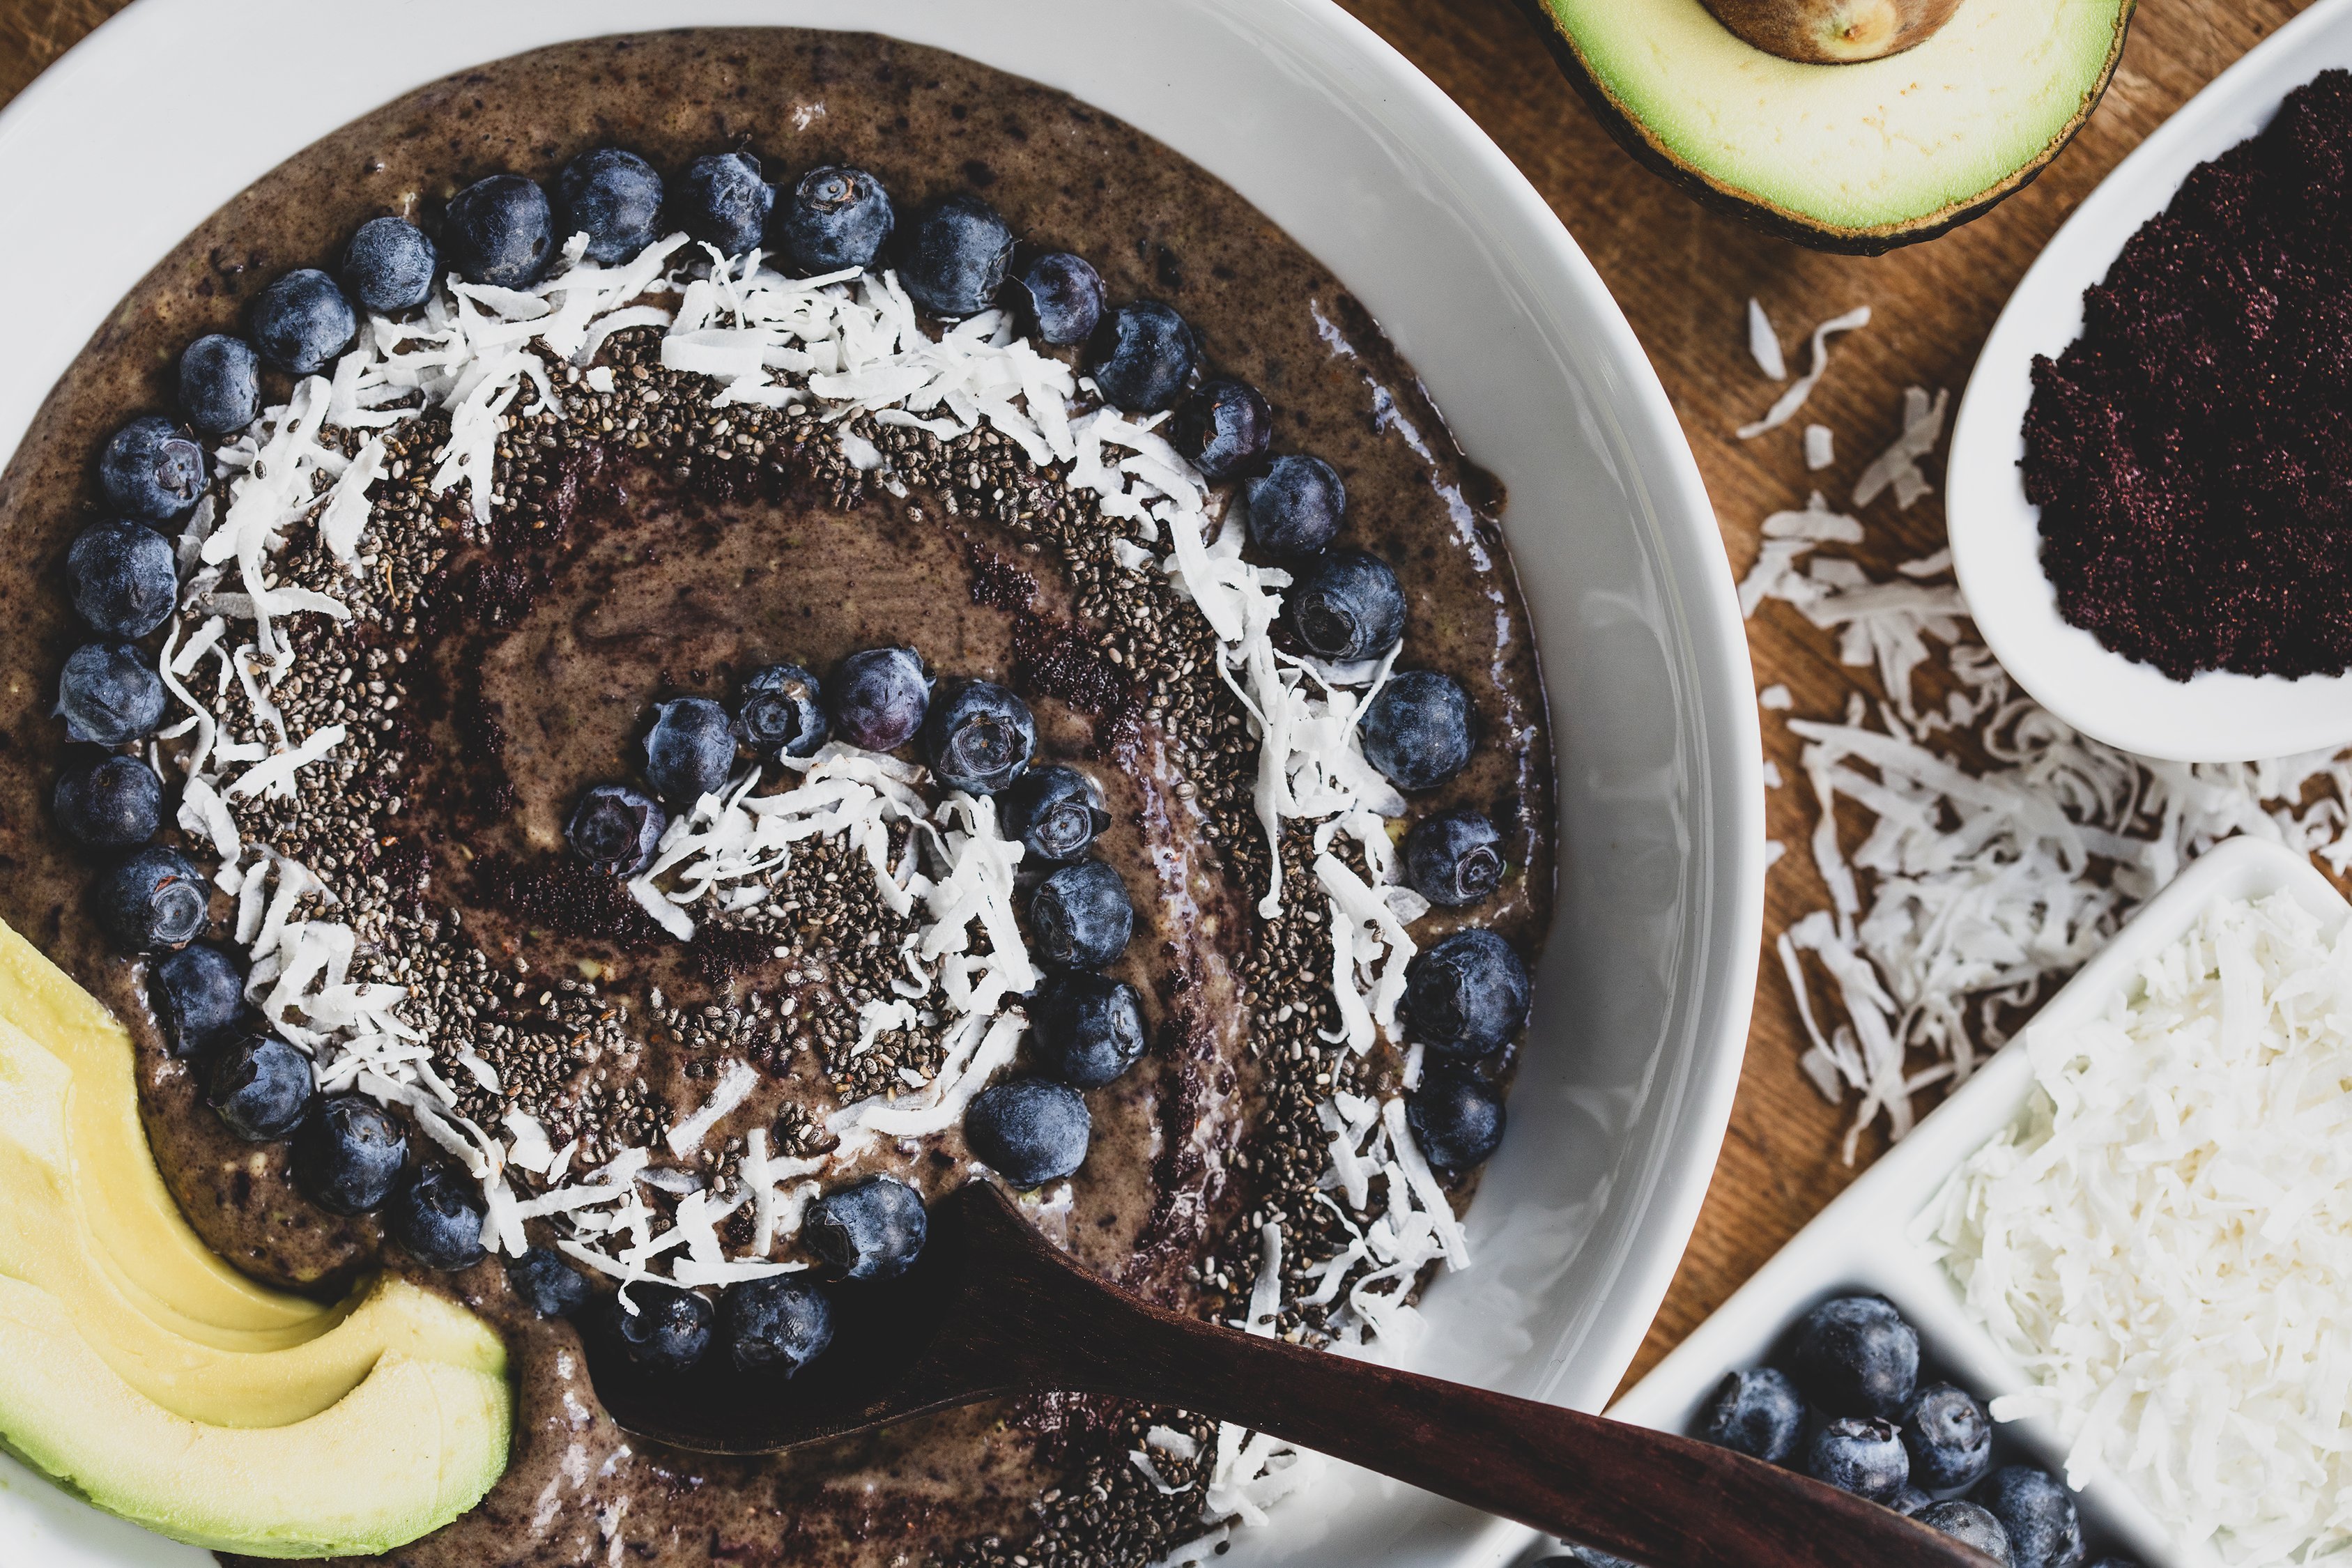 How to Make a Superfood Smoothie Bowl + 6 Recipes